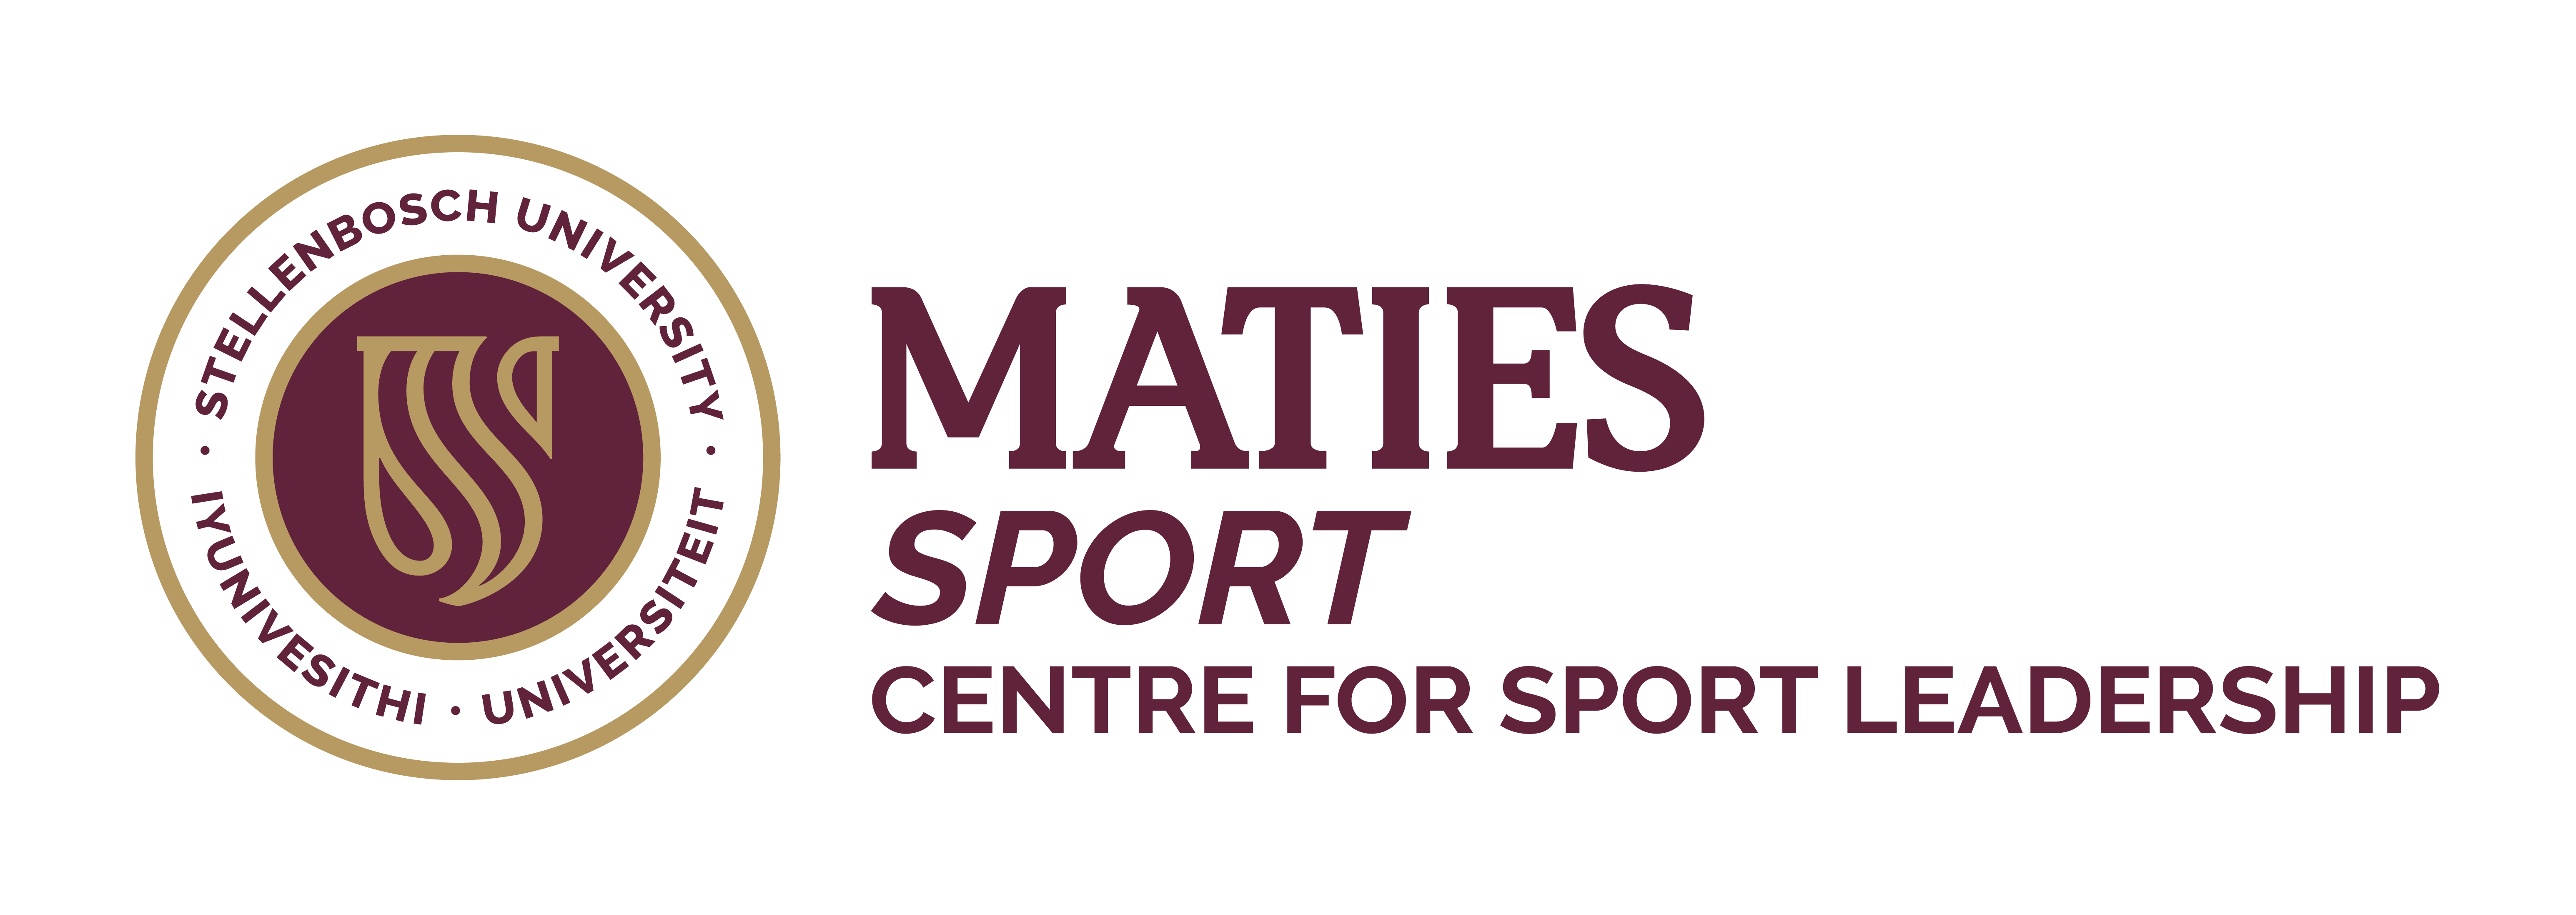 Maties Sport_Centre for sportleadership_RGB-01